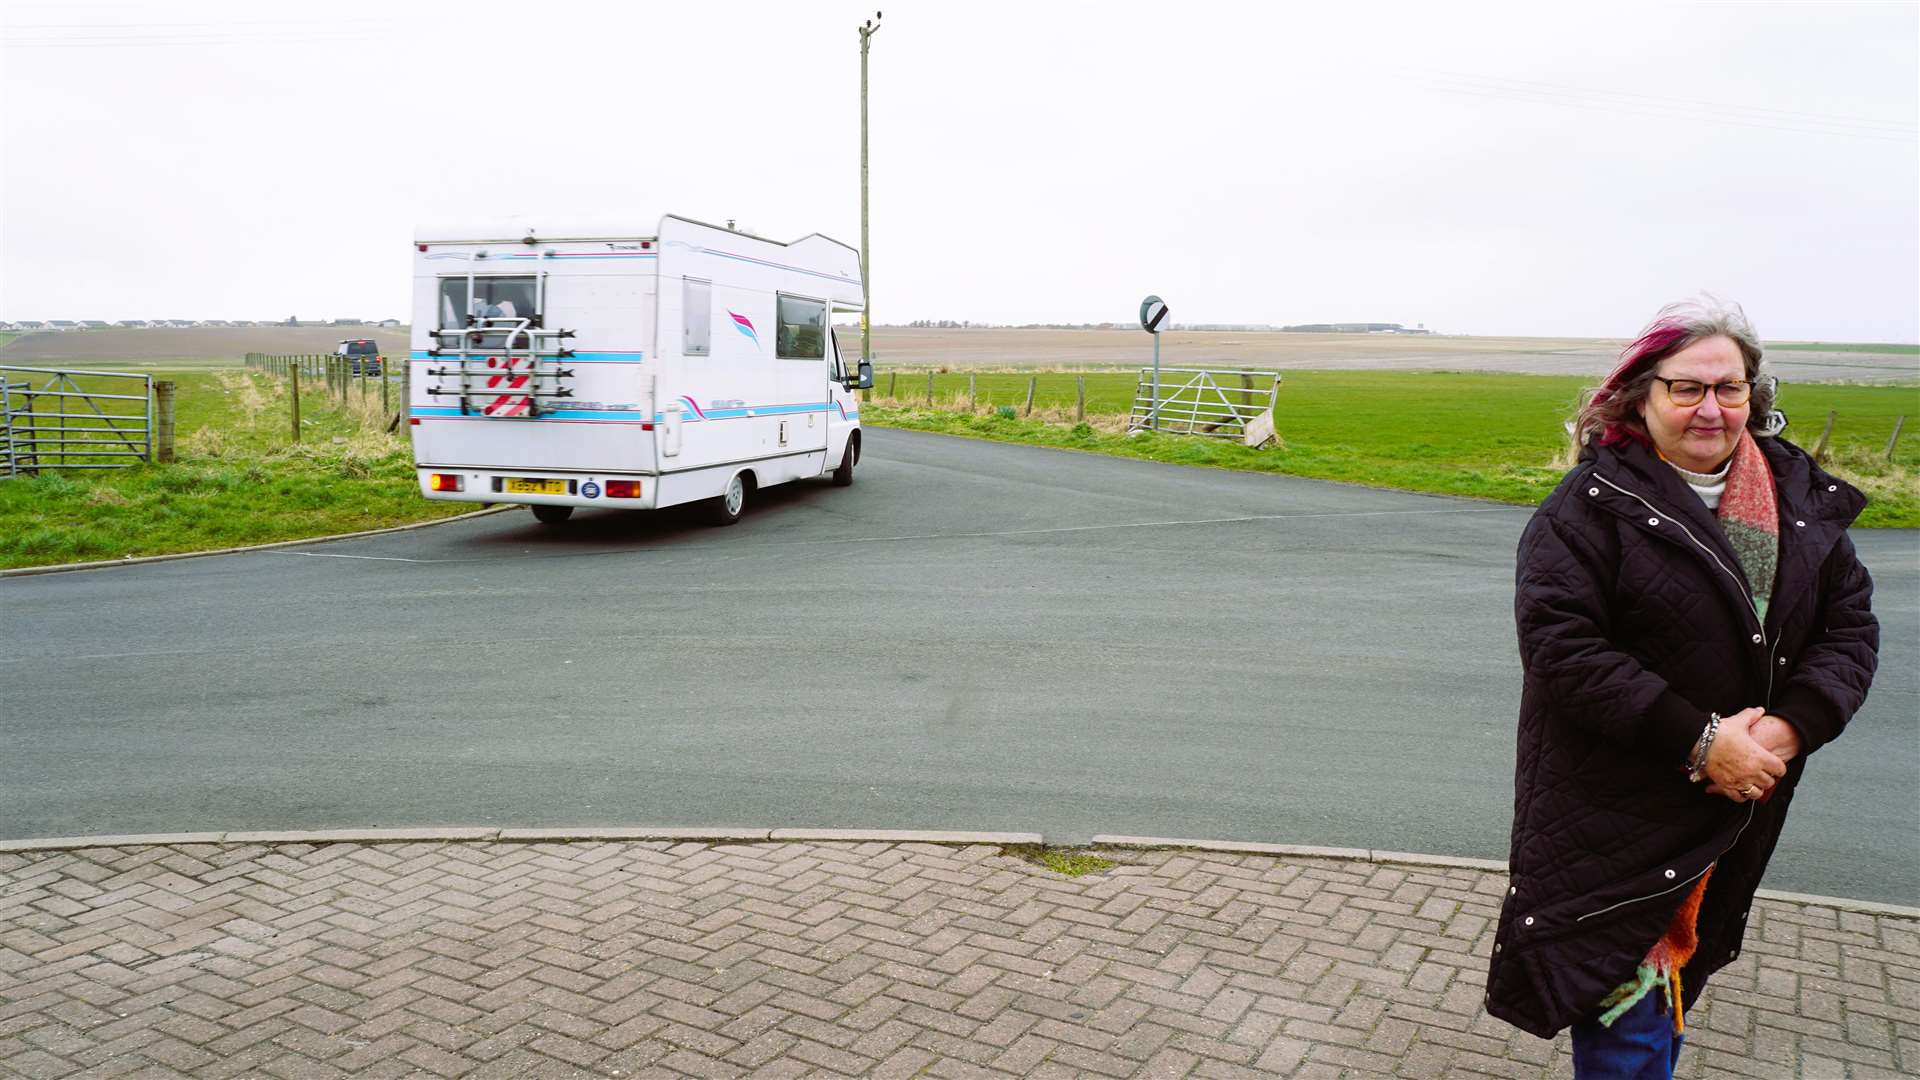 A number of campervans were seen going through Staxigoe on the way to the nearby tourist destination of Noss Head and Sinclair-Girnigoe Castle. This one did indicate it was turning left but many others failed. Picture: DGS